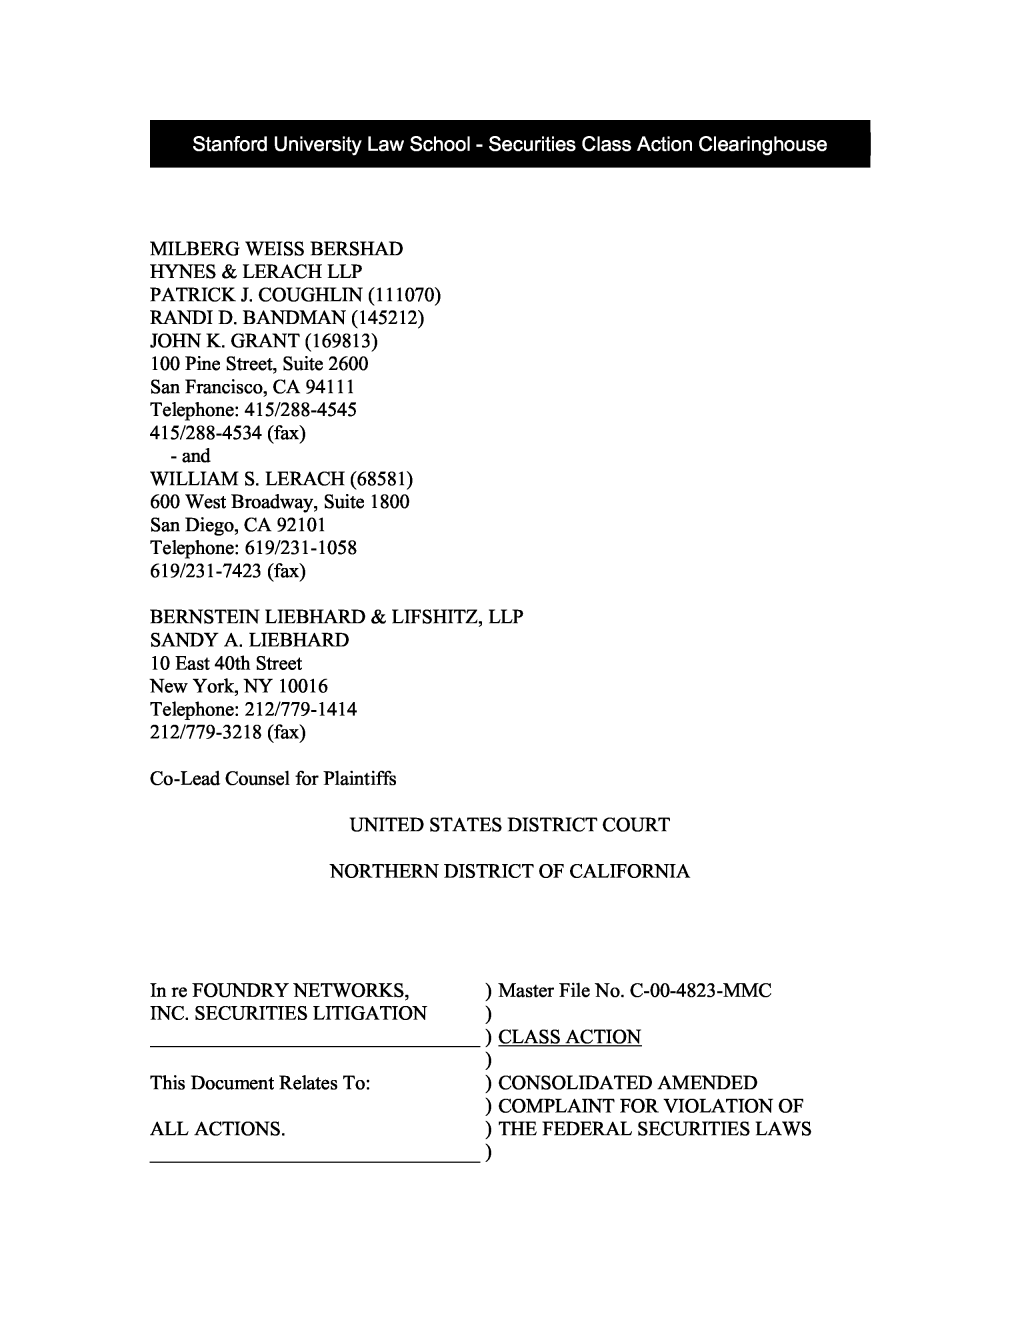 In Re: Foundry Networks, Inc. Securities Litigation 00-CV-4823